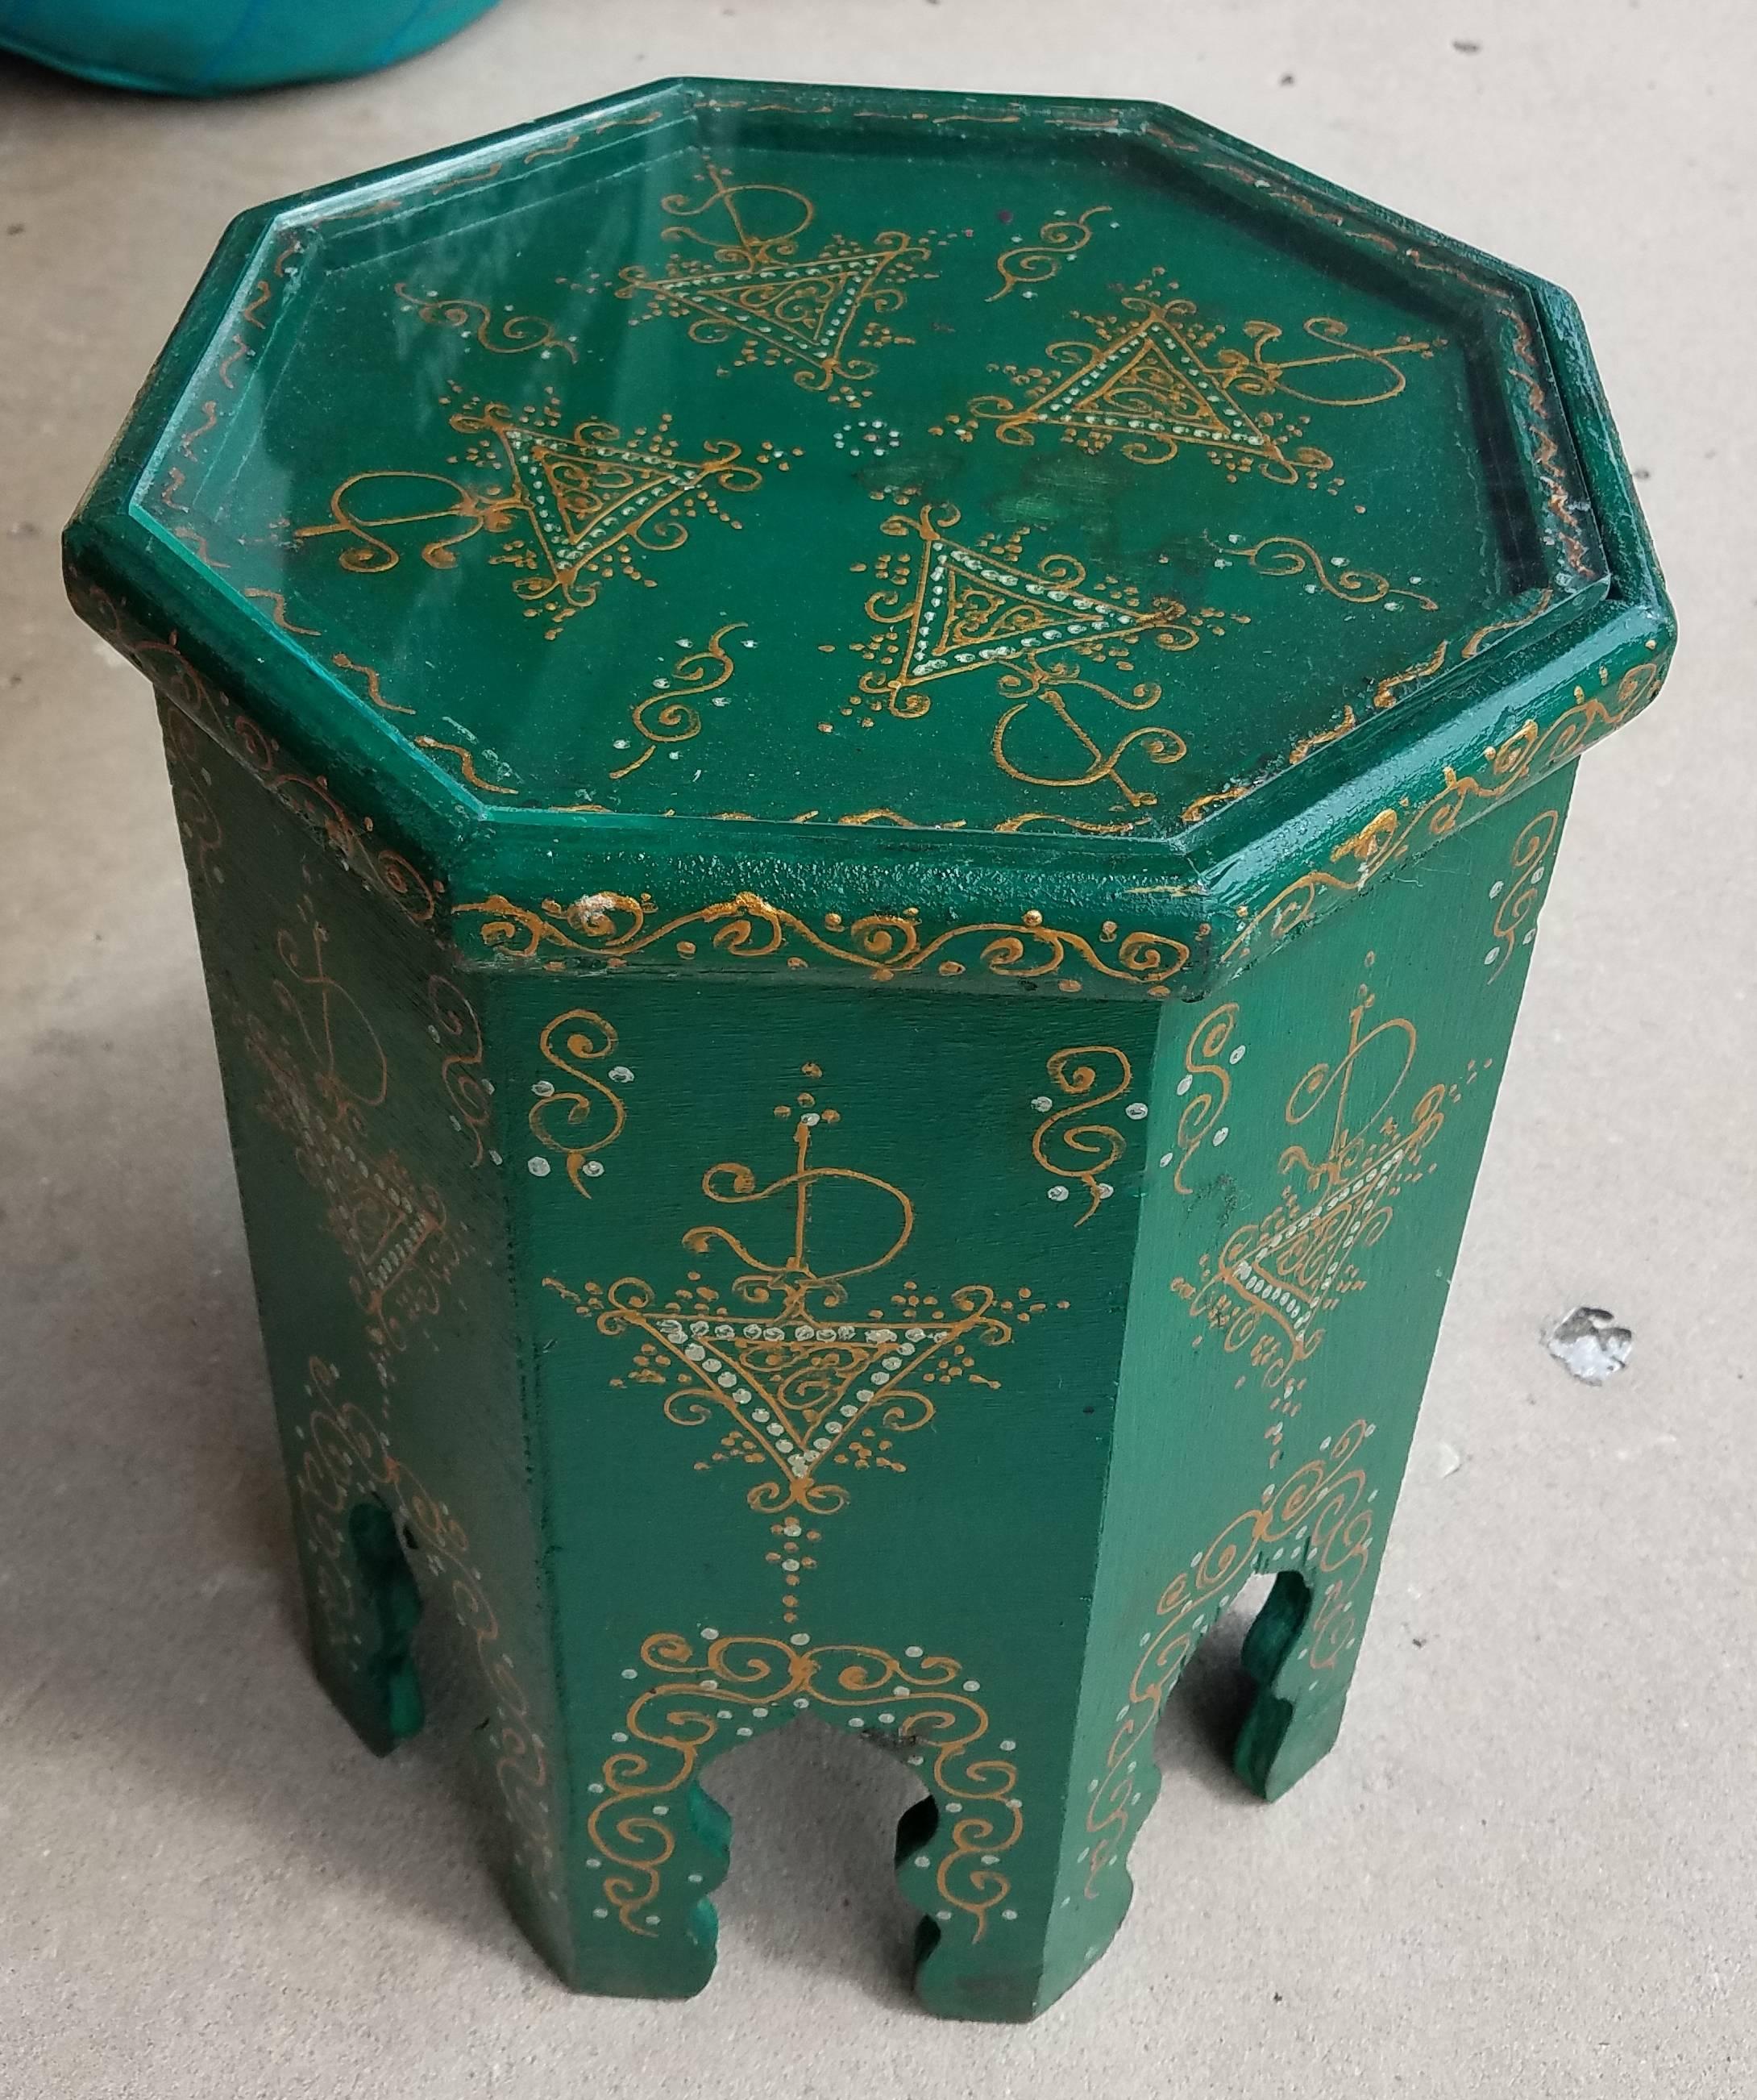 Contemporary Small Hexagonal Moroccan Hand-Painted Side Table in Green